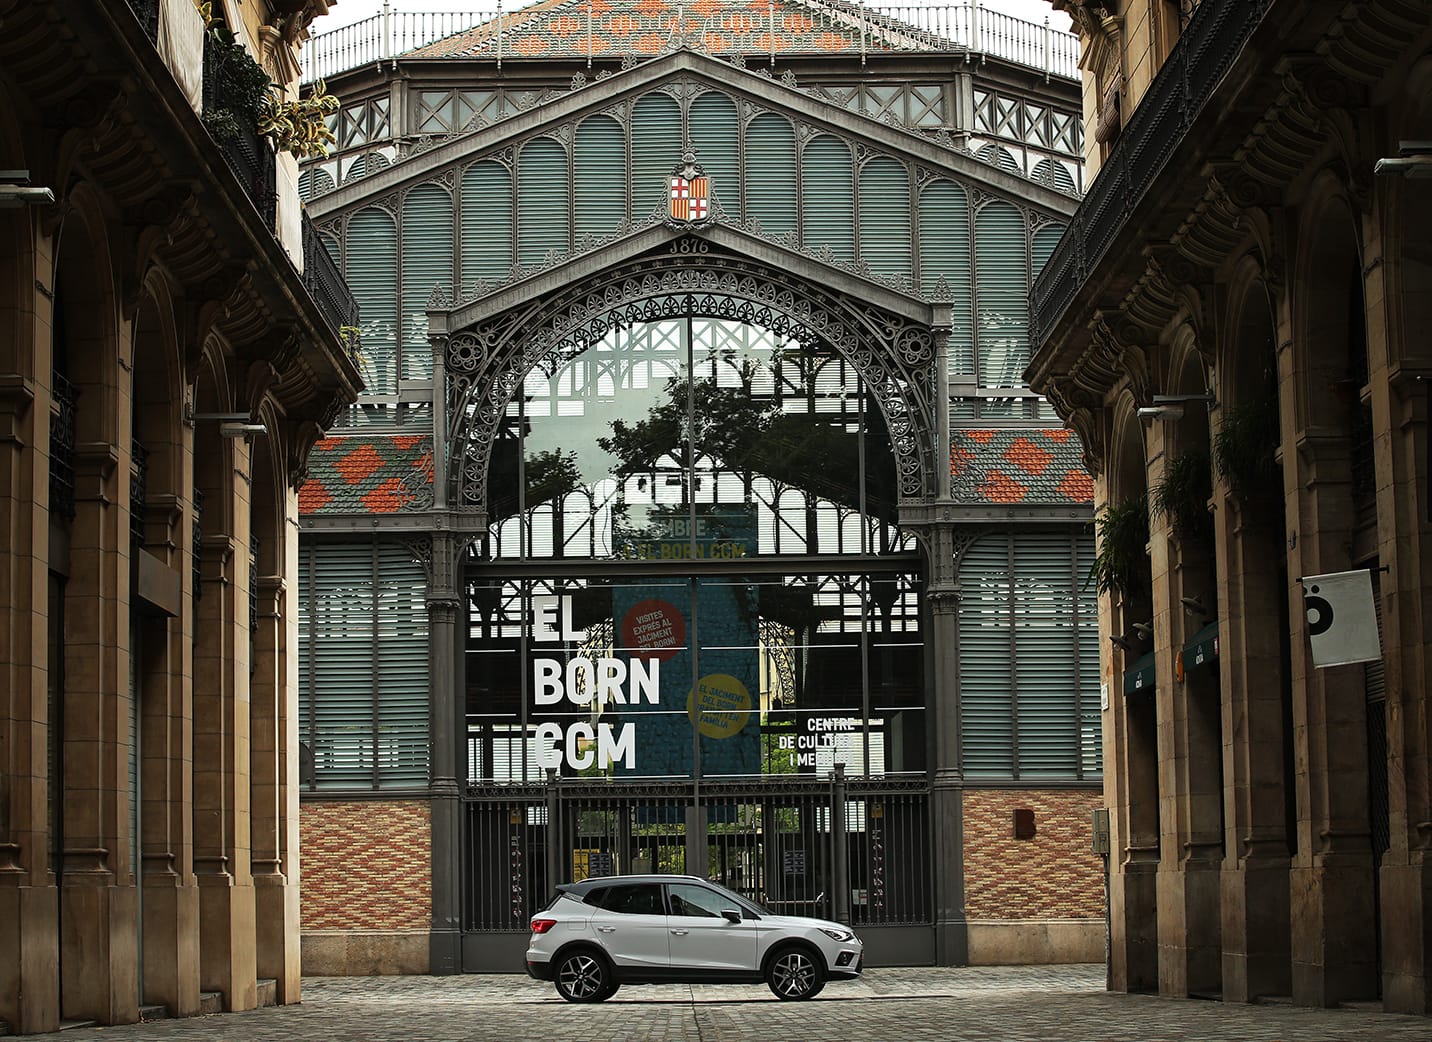 SEAT Arona crossover SUV pictured in front of El Born Centro Cultural in Barcelona city – SEAT Human Resources